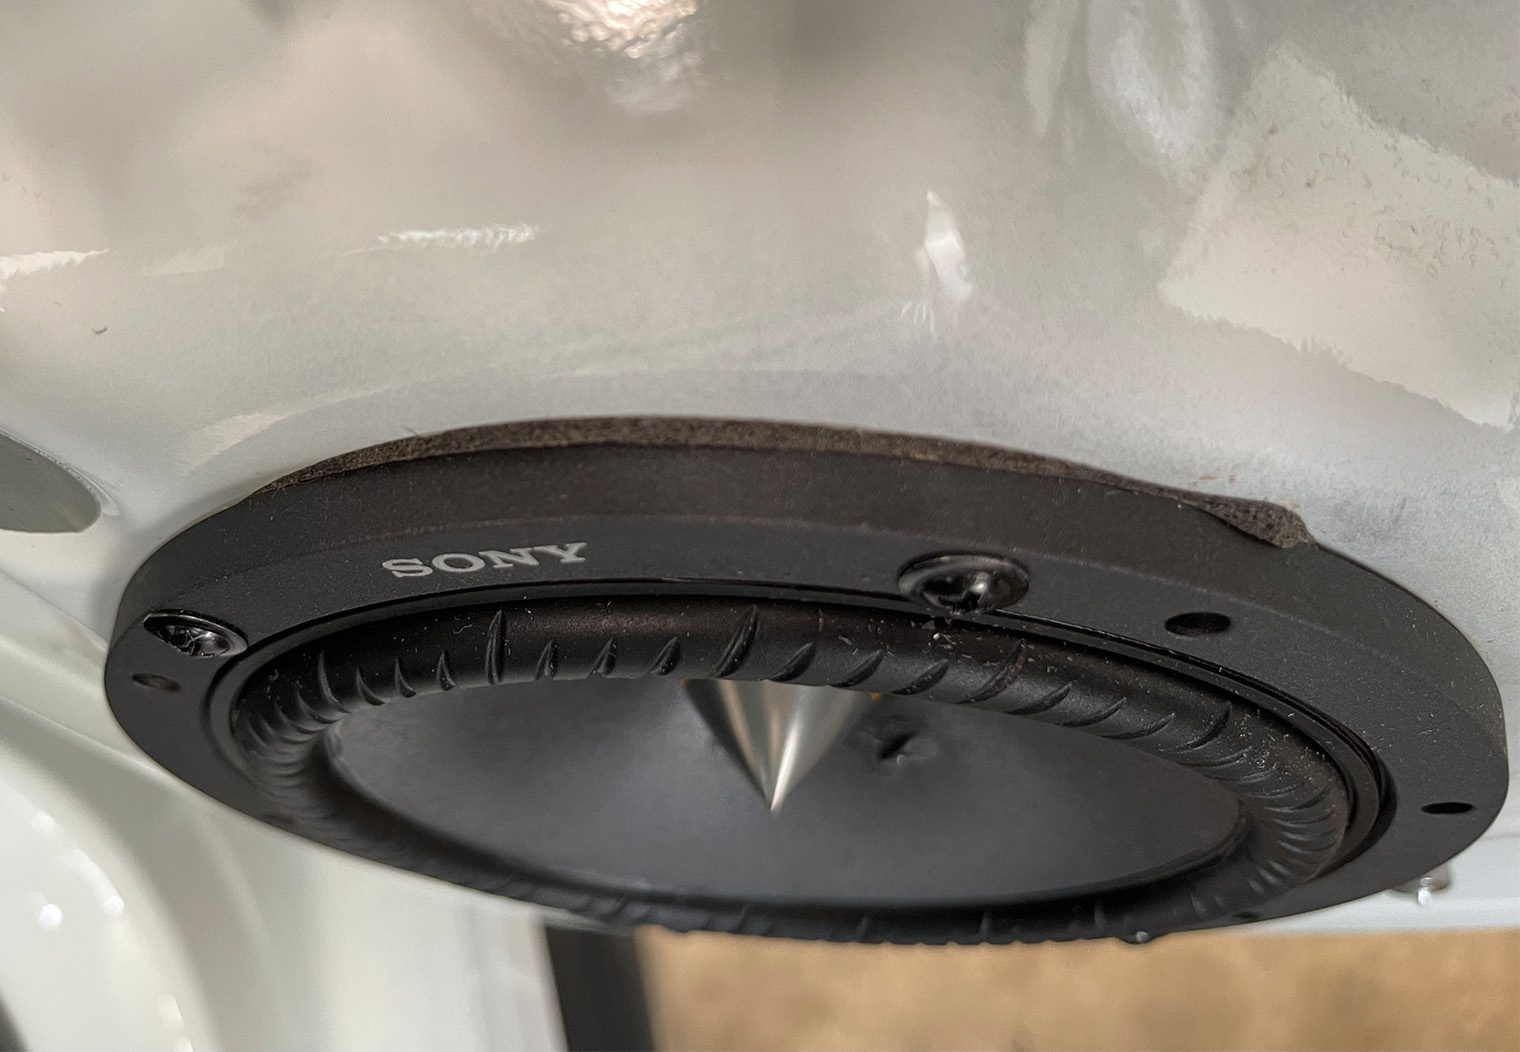 Closeup image of new upgraded Sony speakers on VW GTI MK7.5